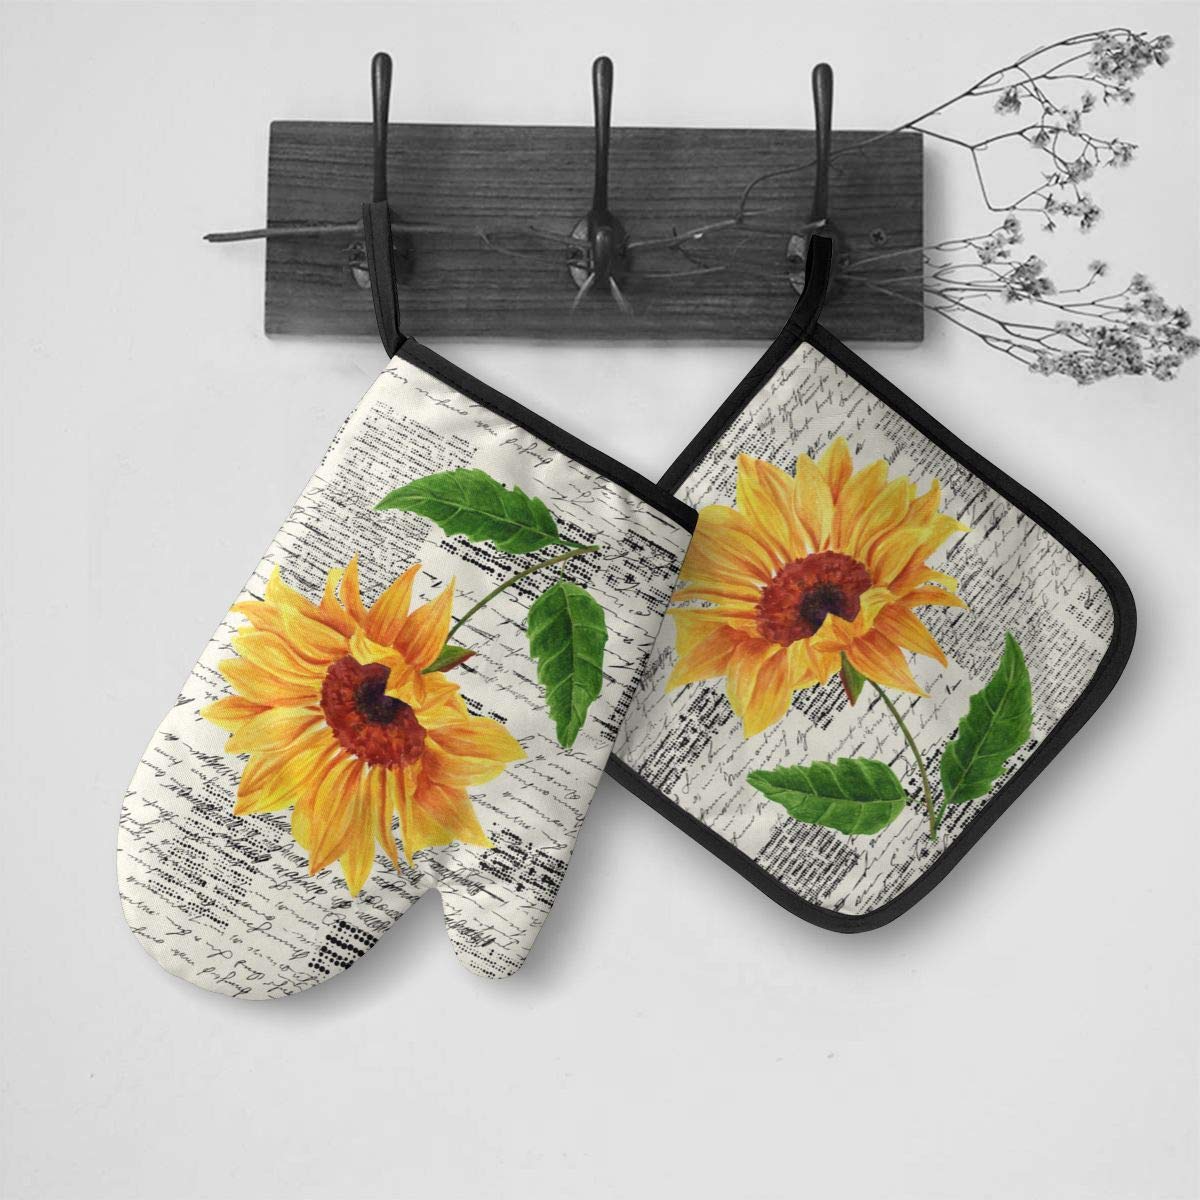 VunKo Watercolor Sunflowers Oven Mitts and Pot Holders Sets Heat Resistant Oven Gloves with Non-Slip Surface for Safe BBQ Cooking Baking Grilling Set of 2